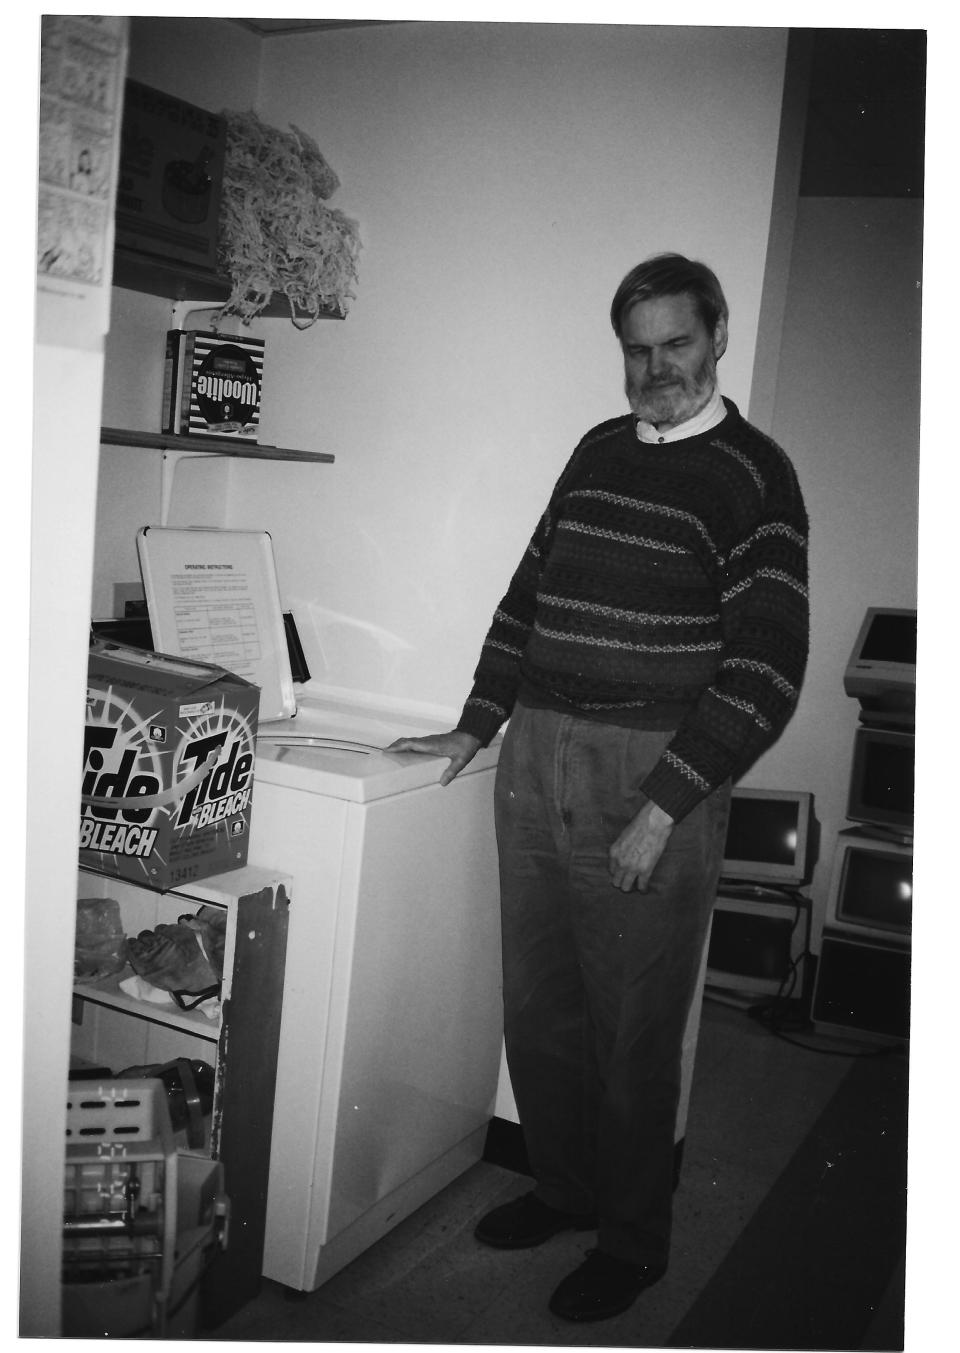 Boyer in 1997, following a move from from West Washington Avenue to East Washington Avenue in Madison. Boyer was fiercely independent and lived on his own for most of his life.